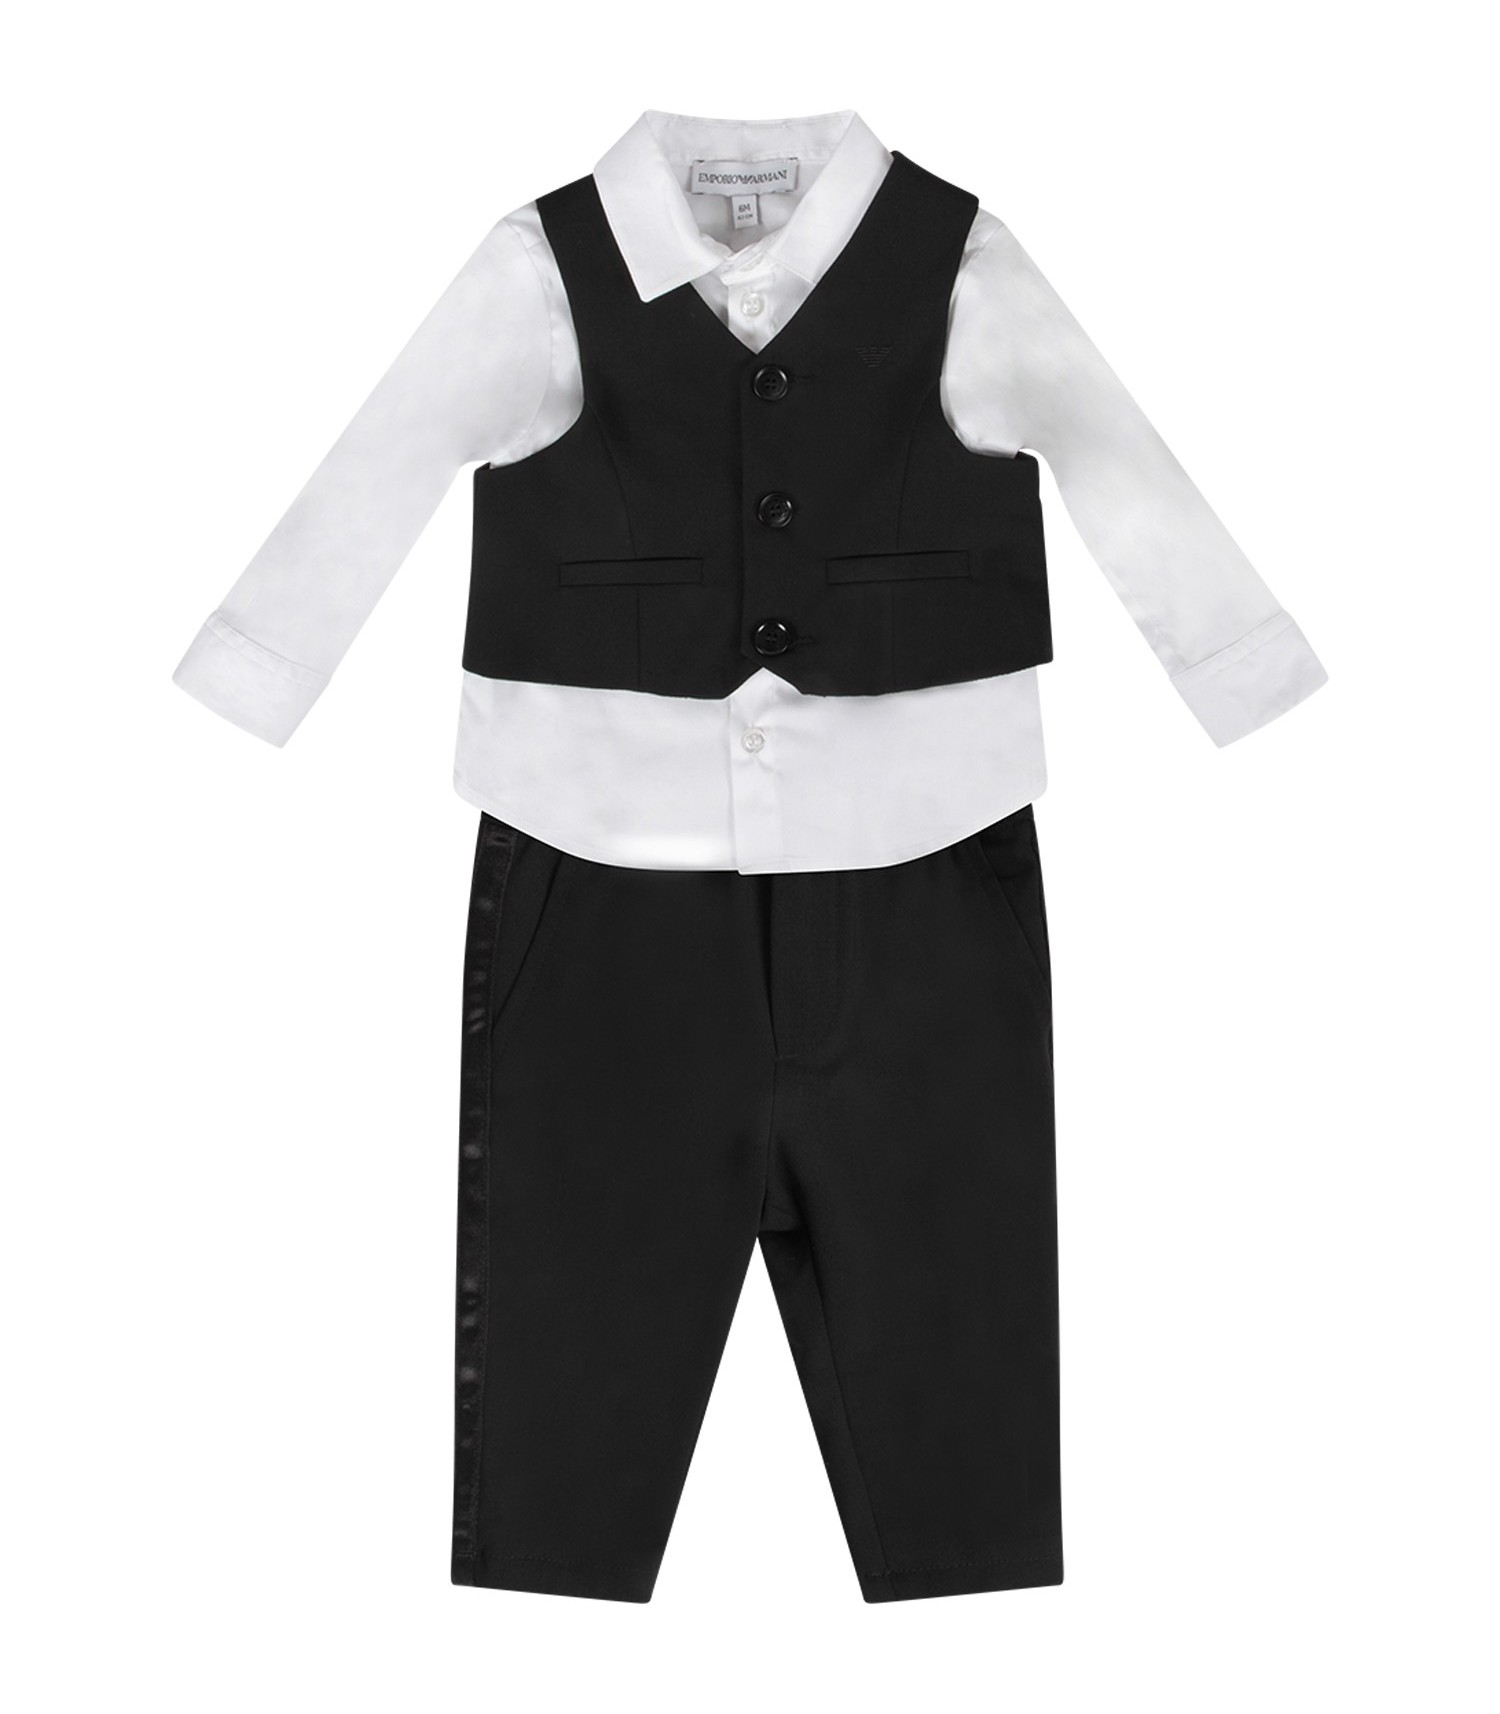 Armani Junior Black and white suit for 